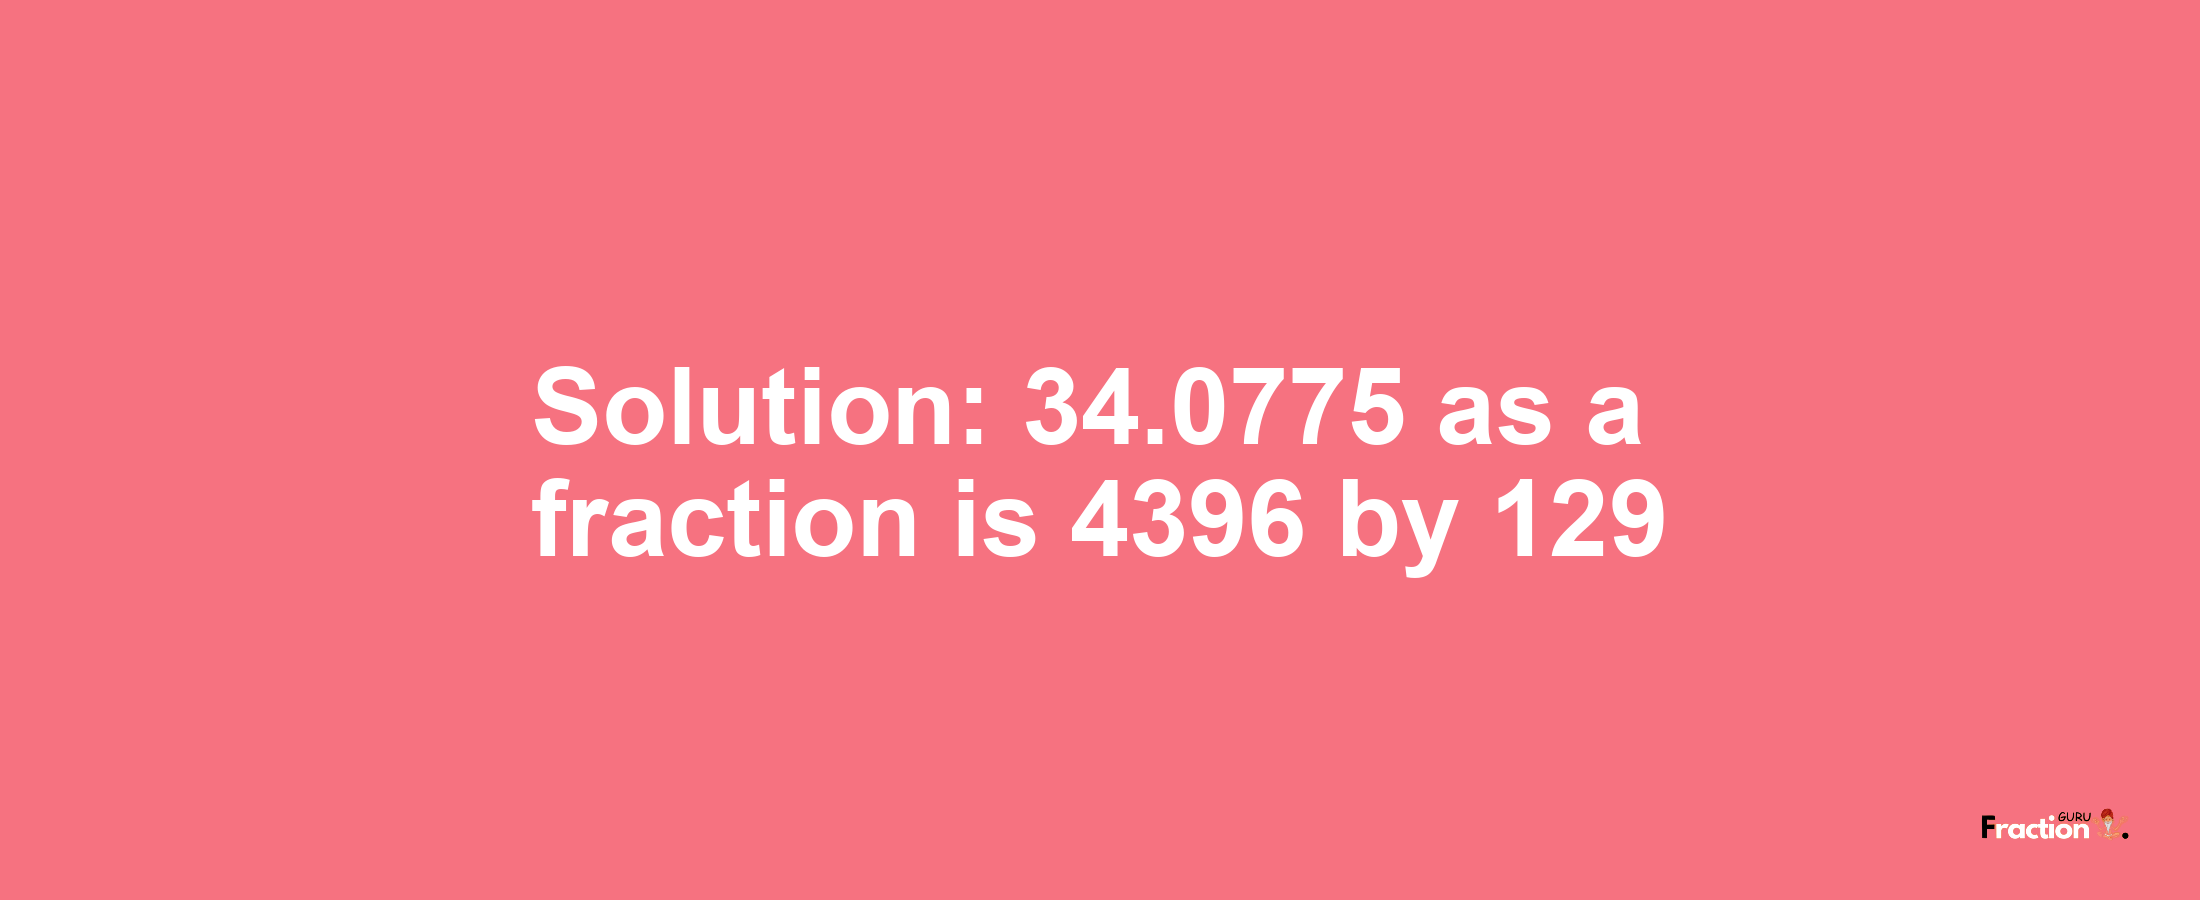 Solution:34.0775 as a fraction is 4396/129